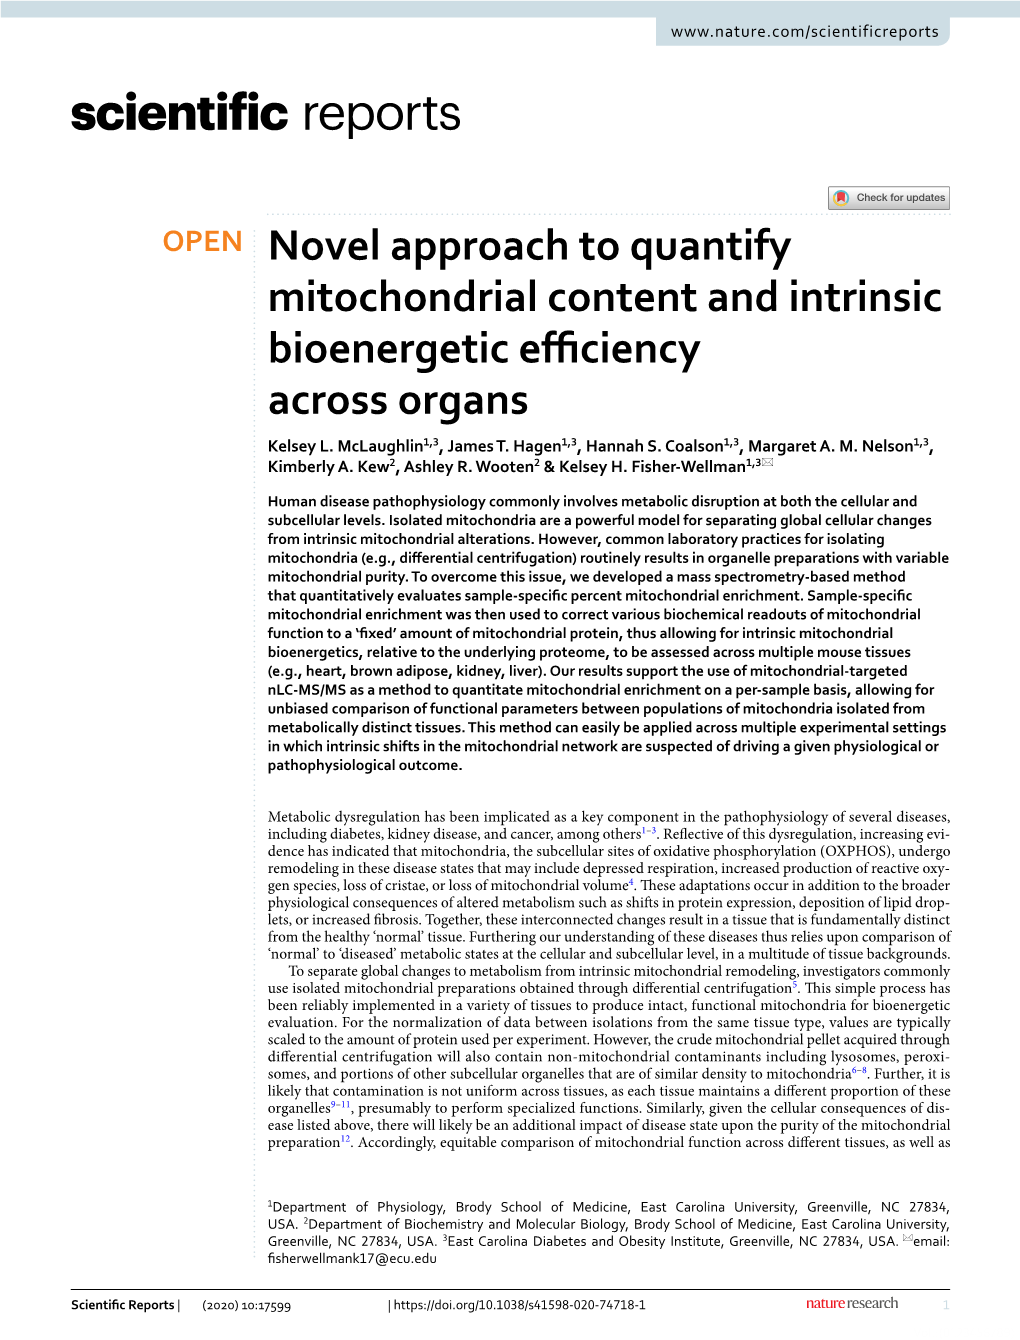 Novel Approach to Quantify Mitochondrial Content and Intrinsic Bioenergetic Efciency Across Organs Kelsey L